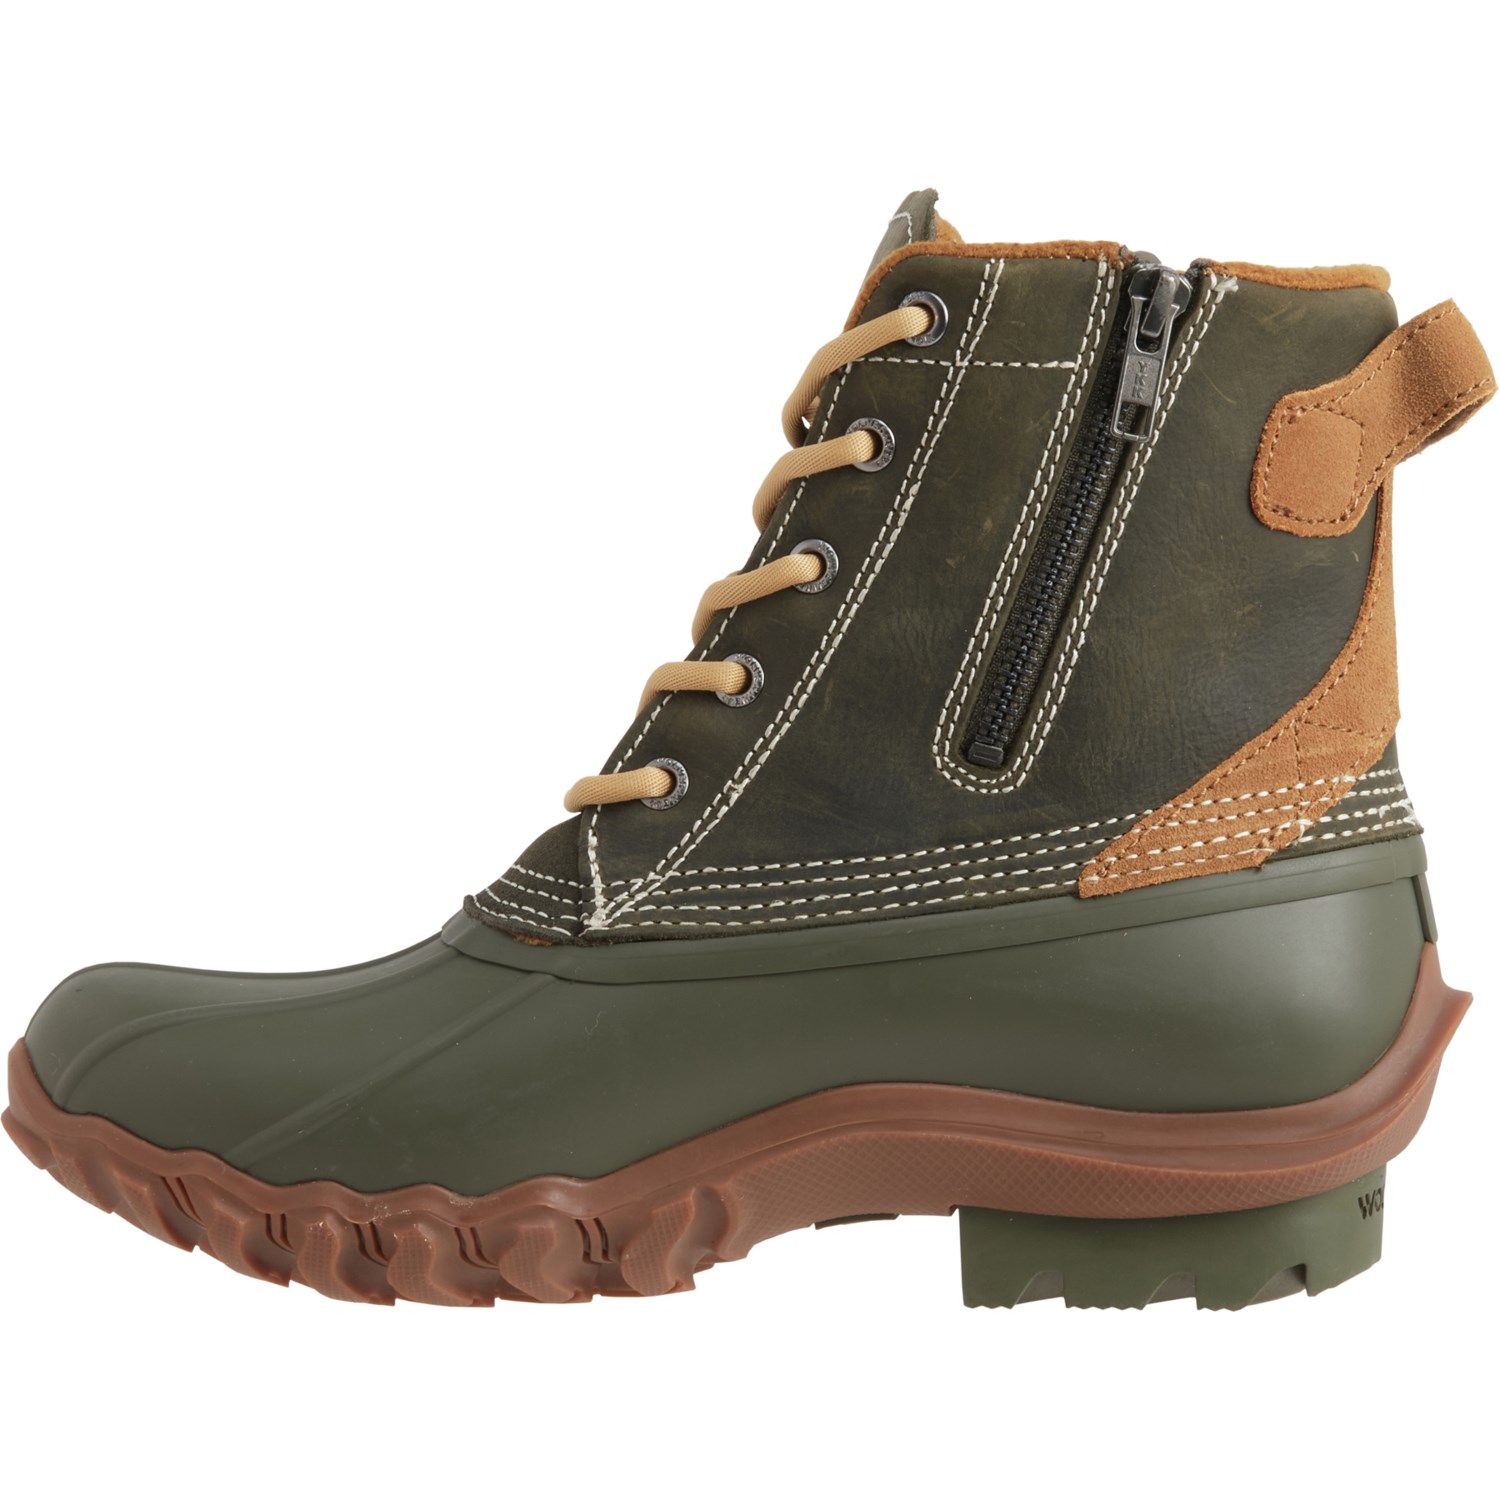 Wolverine Men Shoes Boots Rain Boots Mens Torrent Waterproof Low Duck Boot Olive Size 8.5 Extra Wide Width 